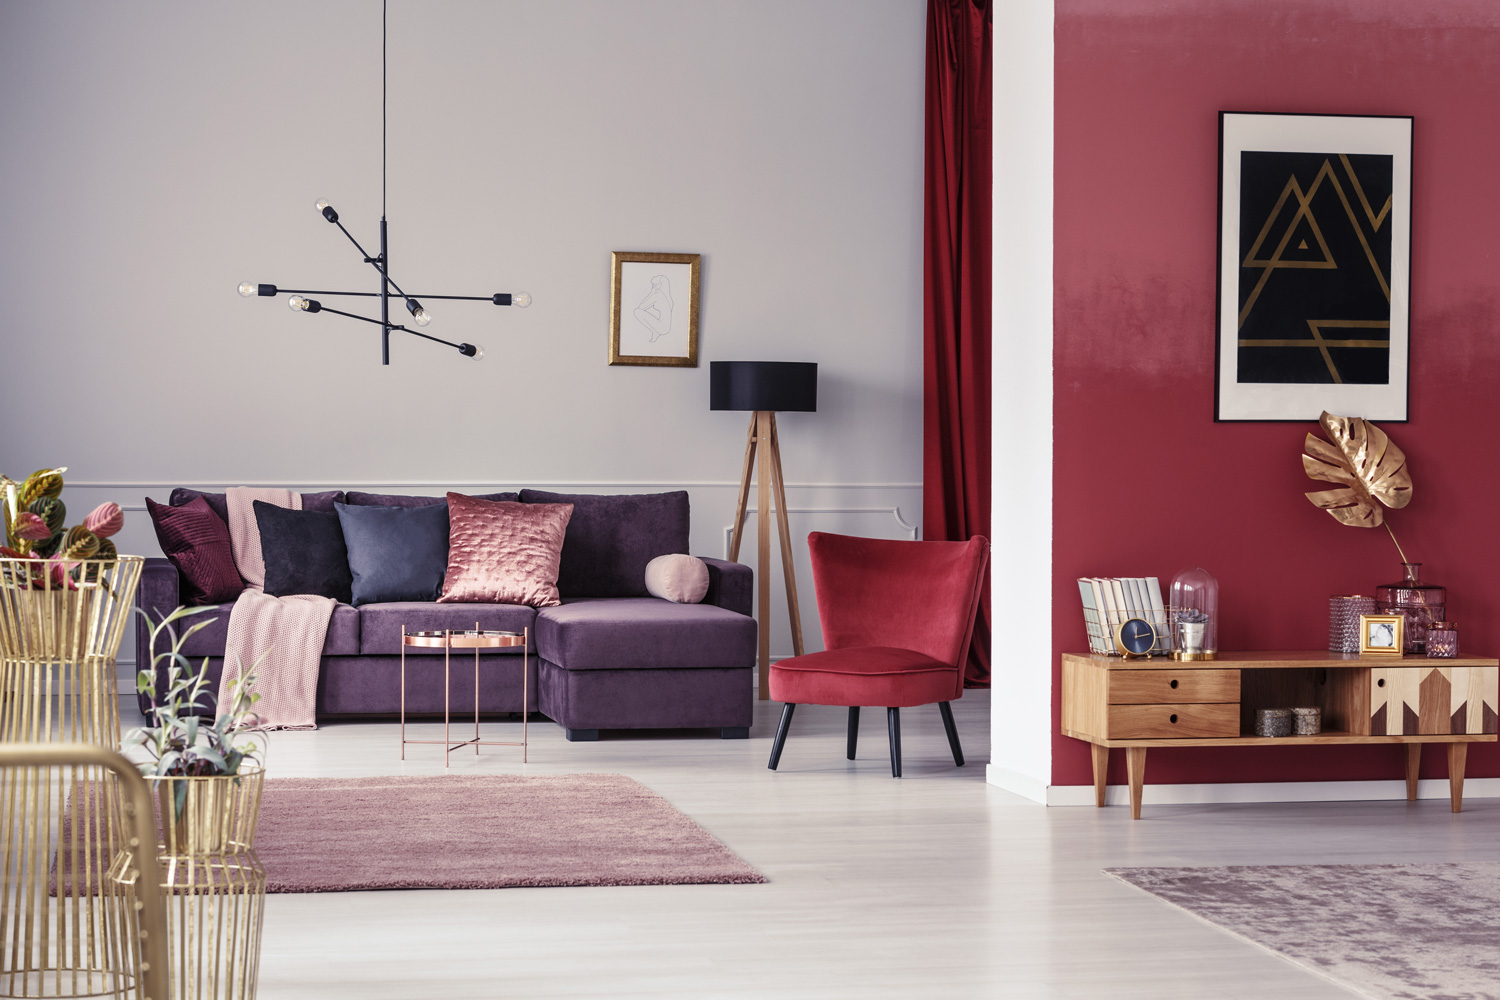 Spacious maroon apartment with corner sofa, red armchair and wooden cupboard